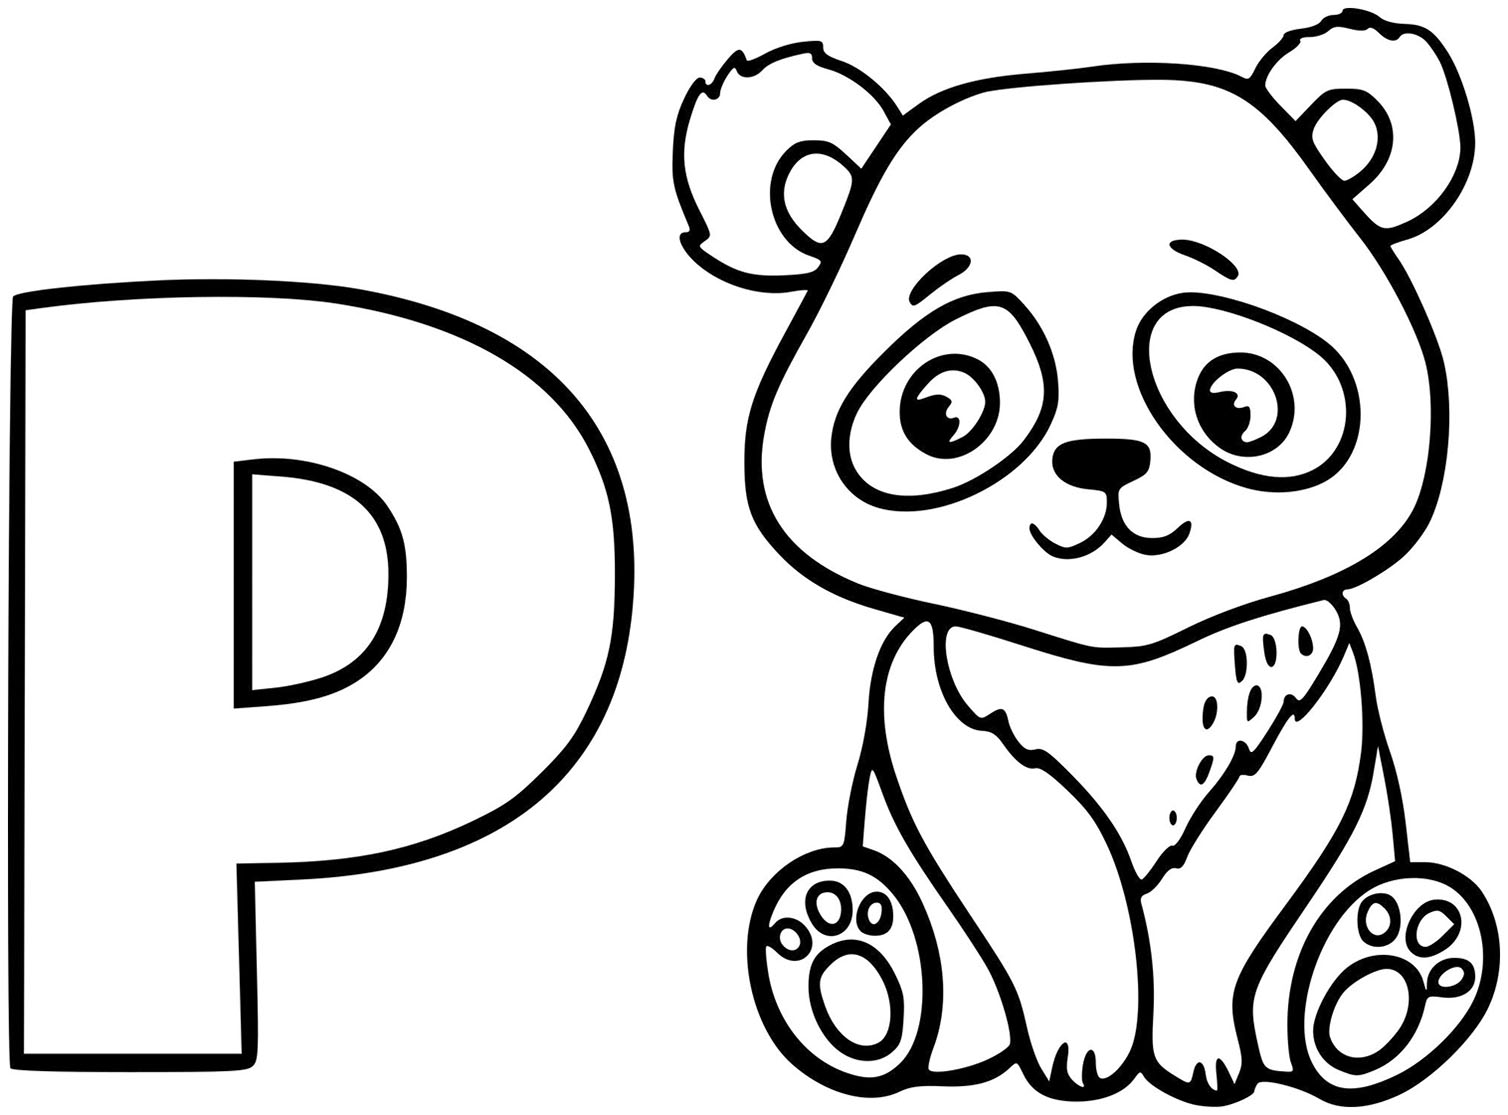 Panda coloring pages for kids